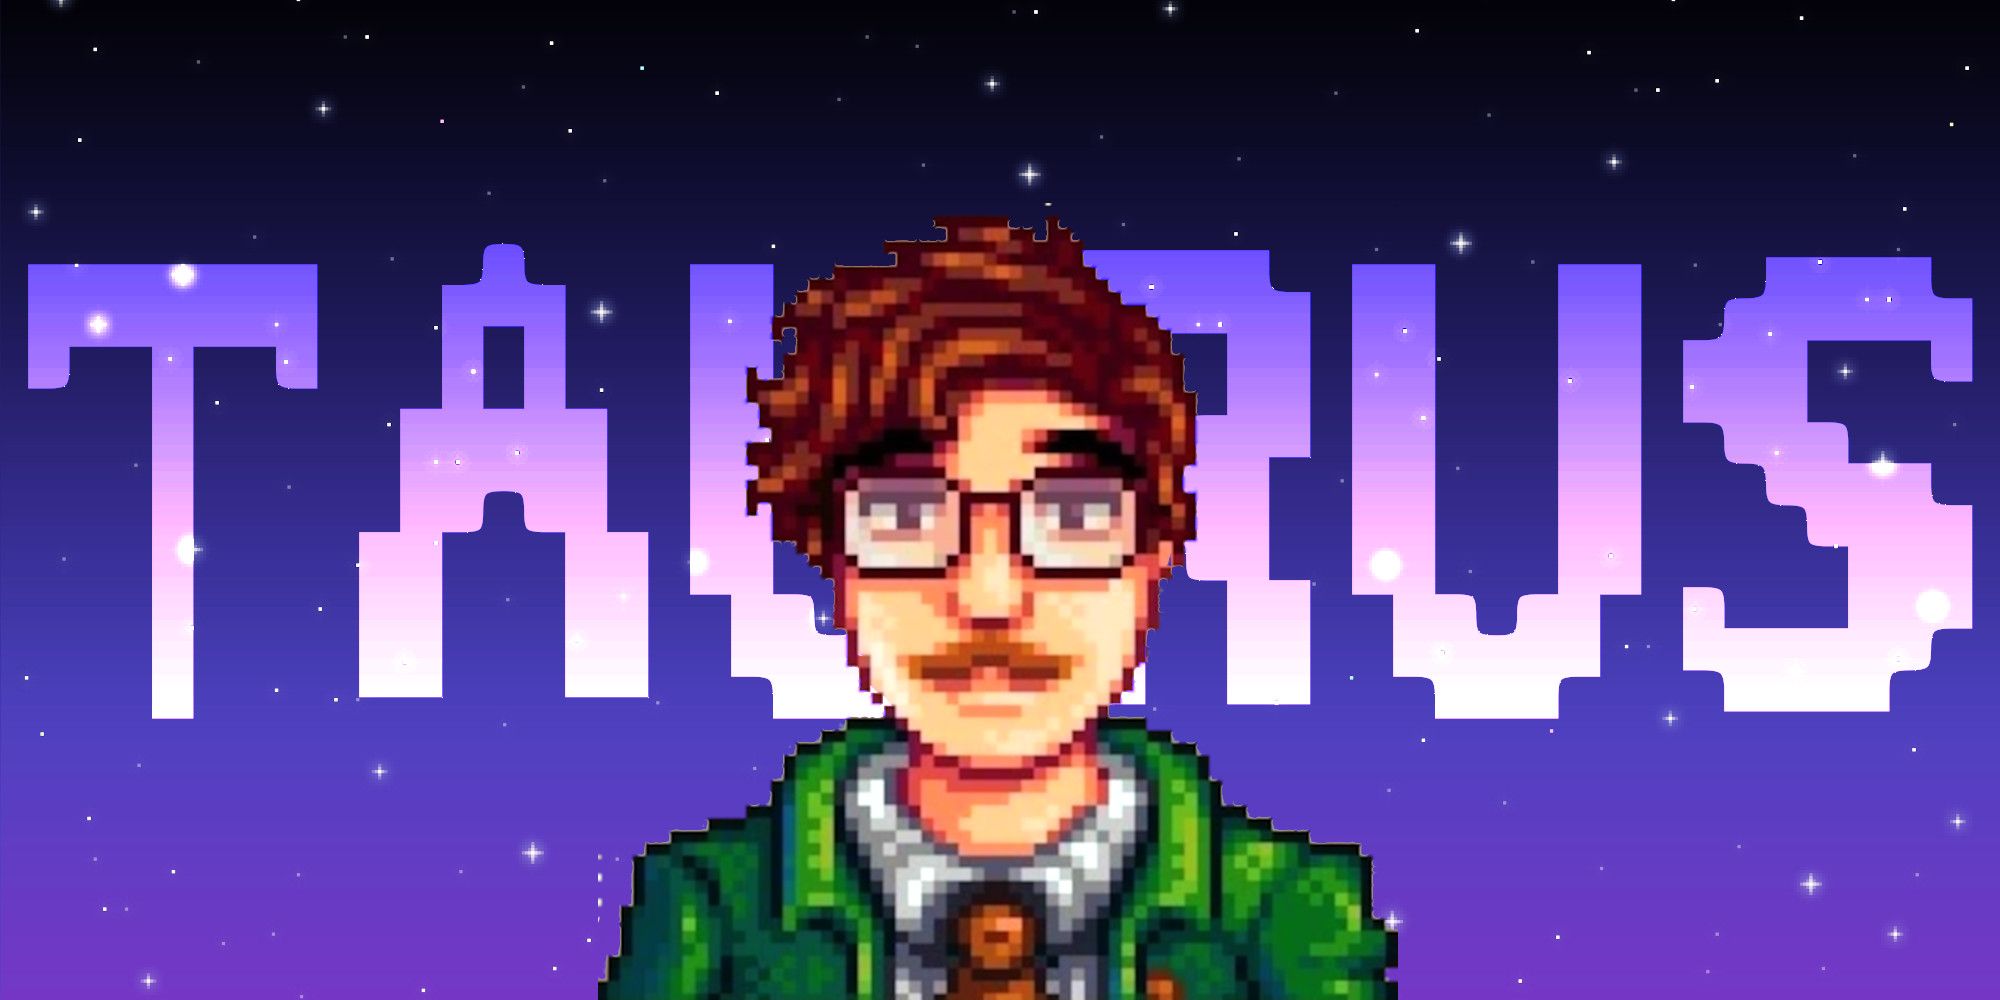 Harvey from Stardew Valley in front of a pixel star background and text reading %22Taurus%22